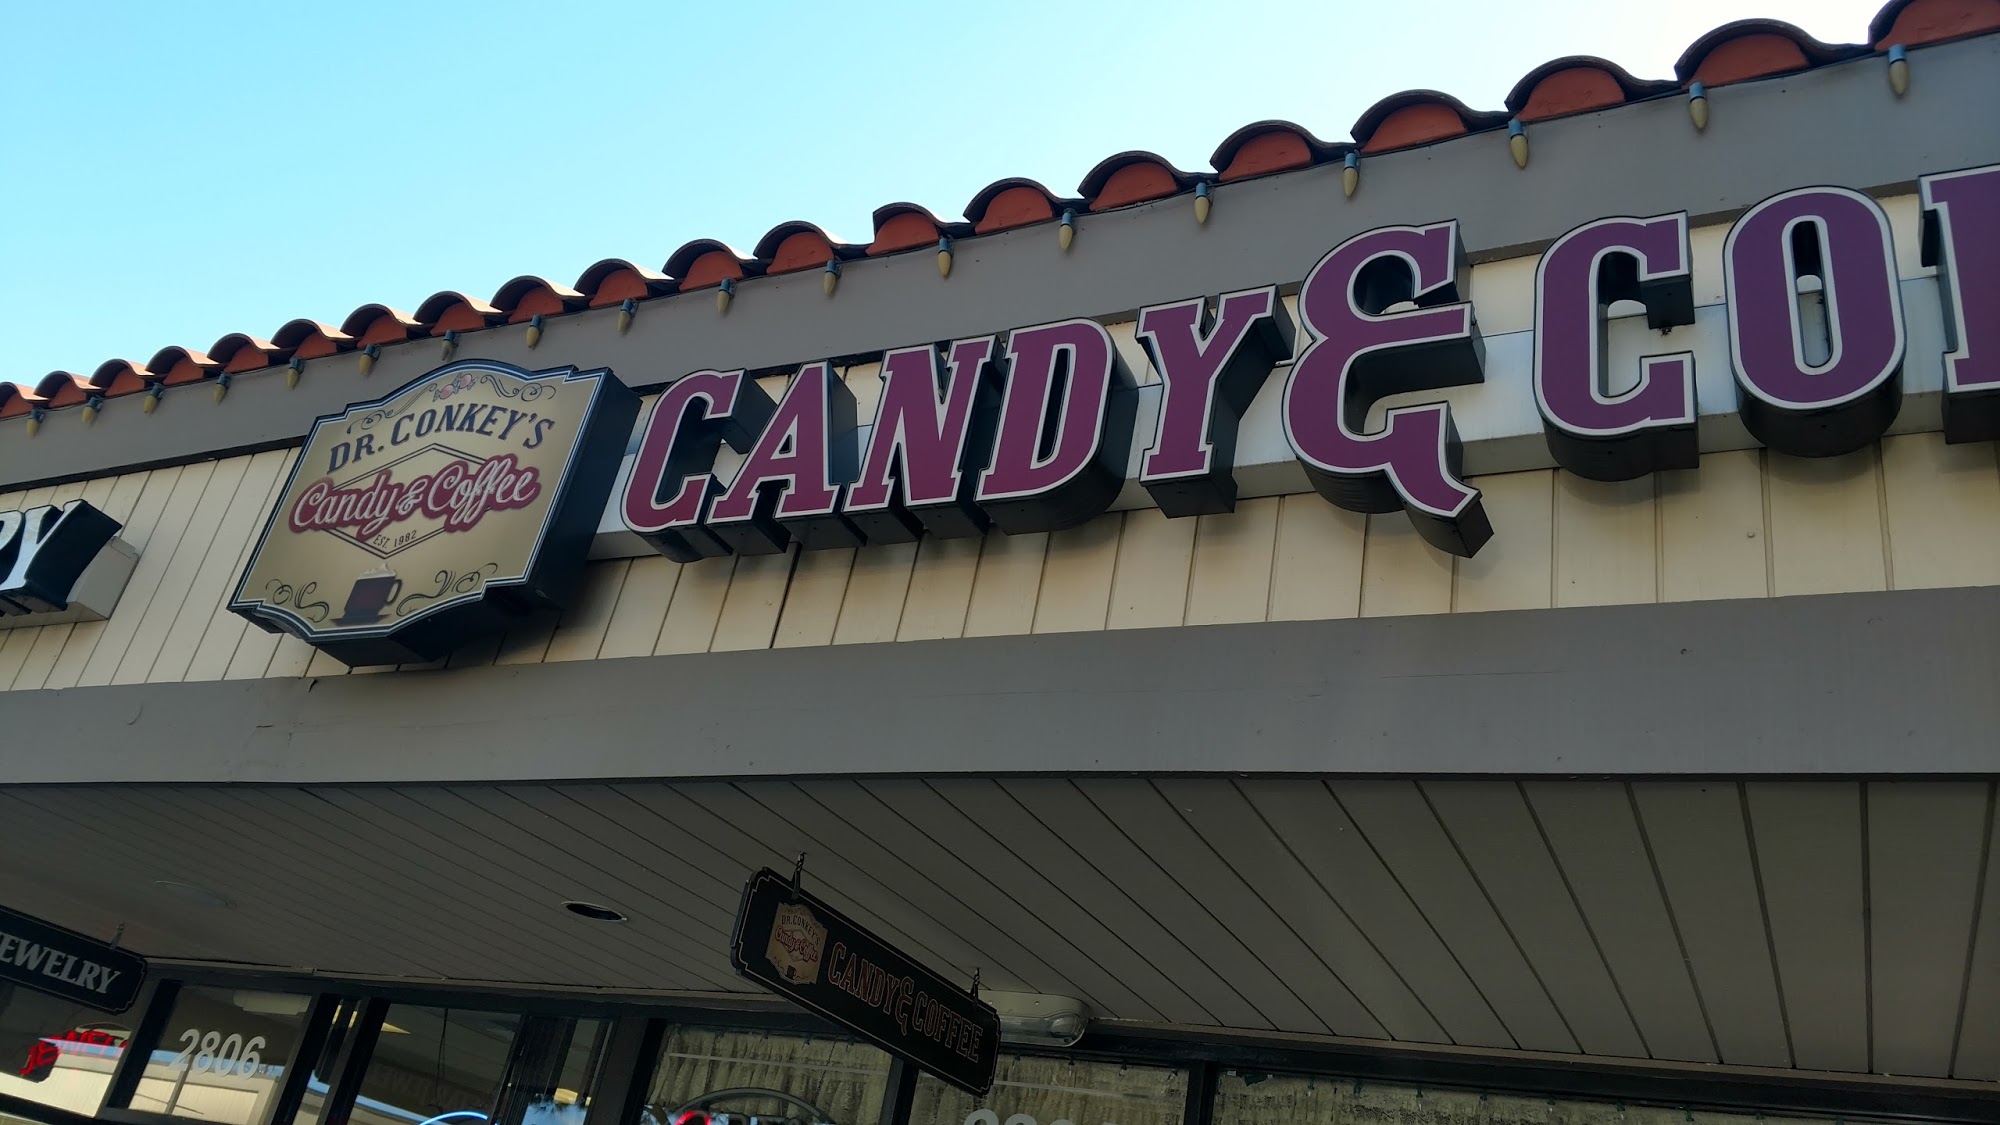 Dr. Conkey's Candy & Coffee